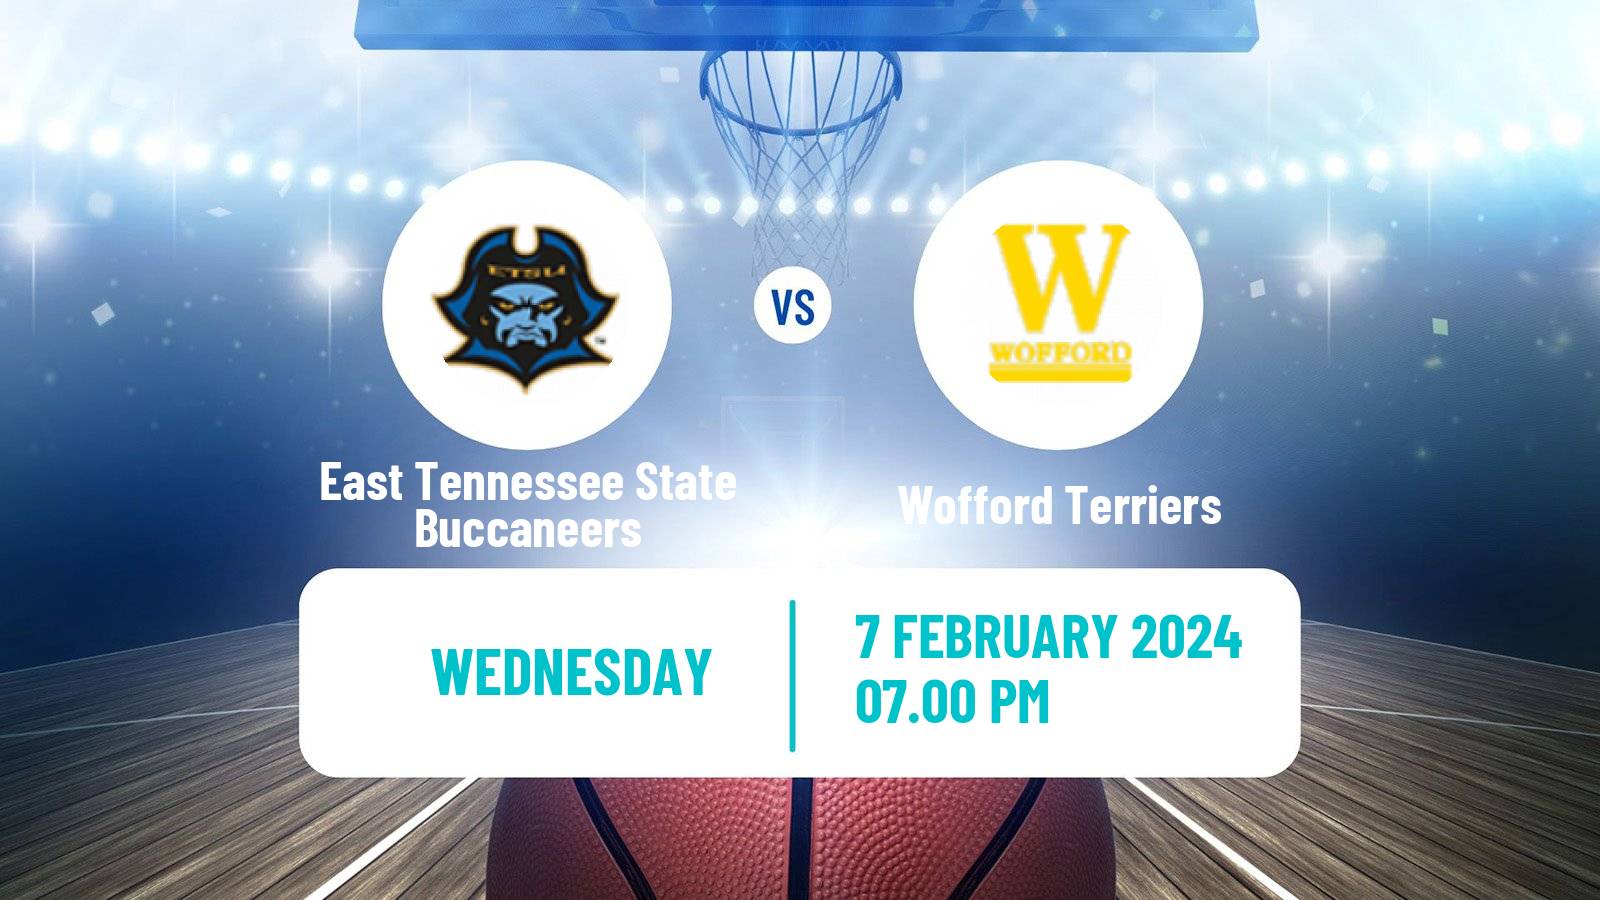 Basketball NCAA College Basketball East Tennessee State Buccaneers - Wofford Terriers